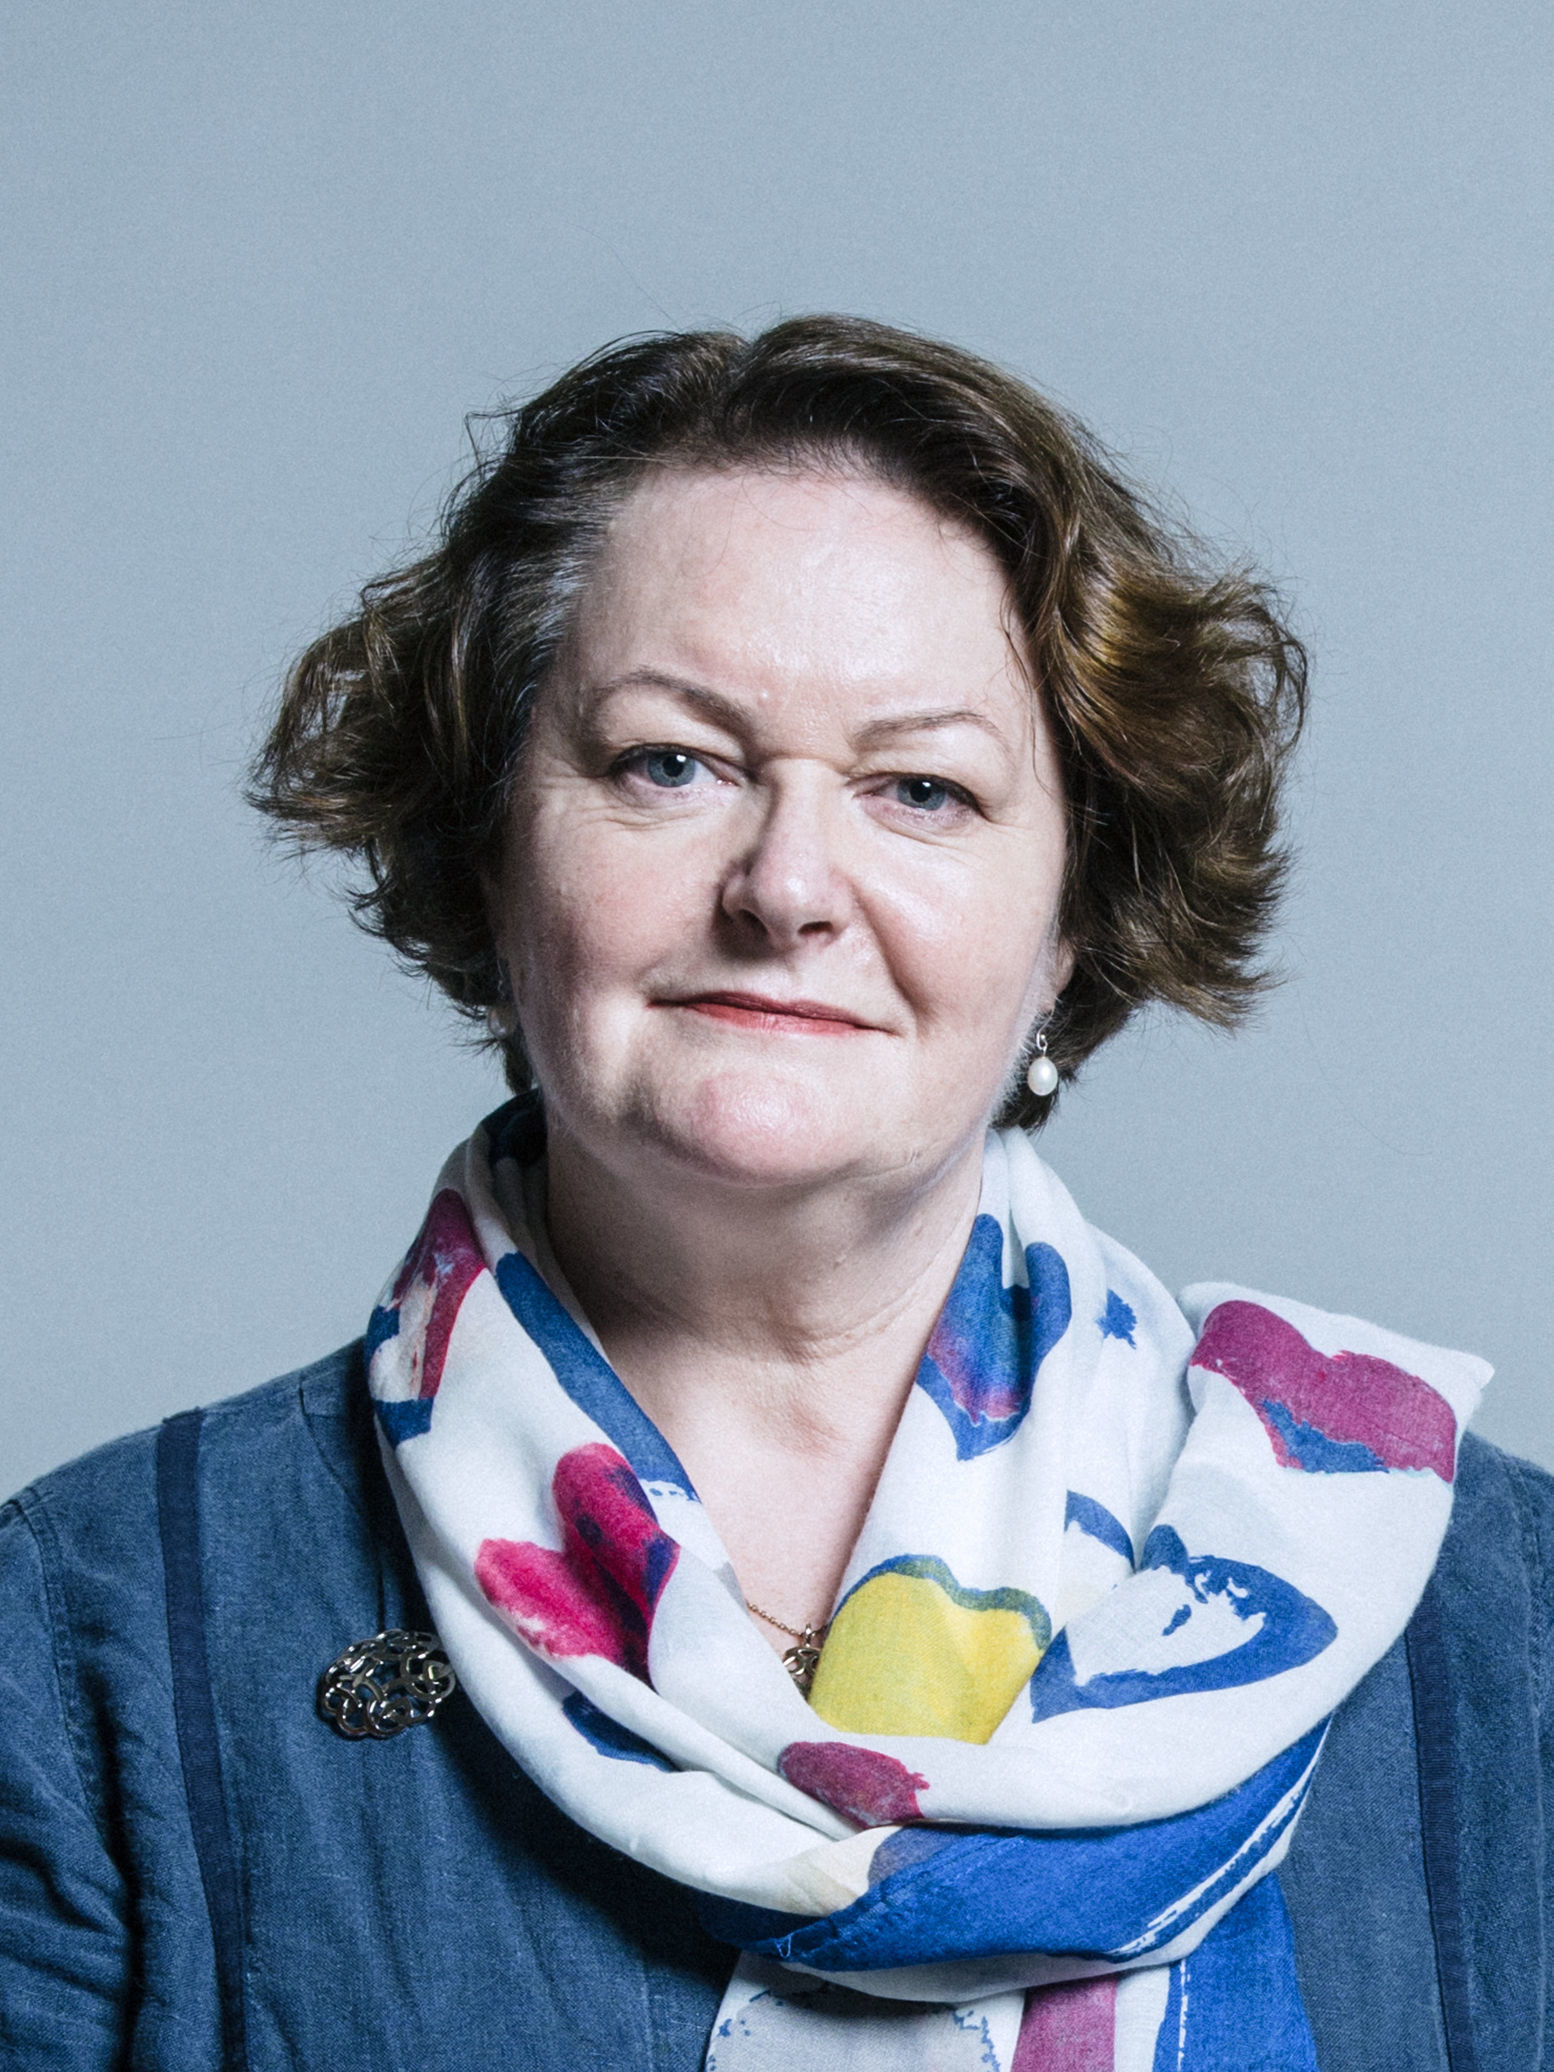 Philippa Whitford - UK Parliament official portraits 2017.